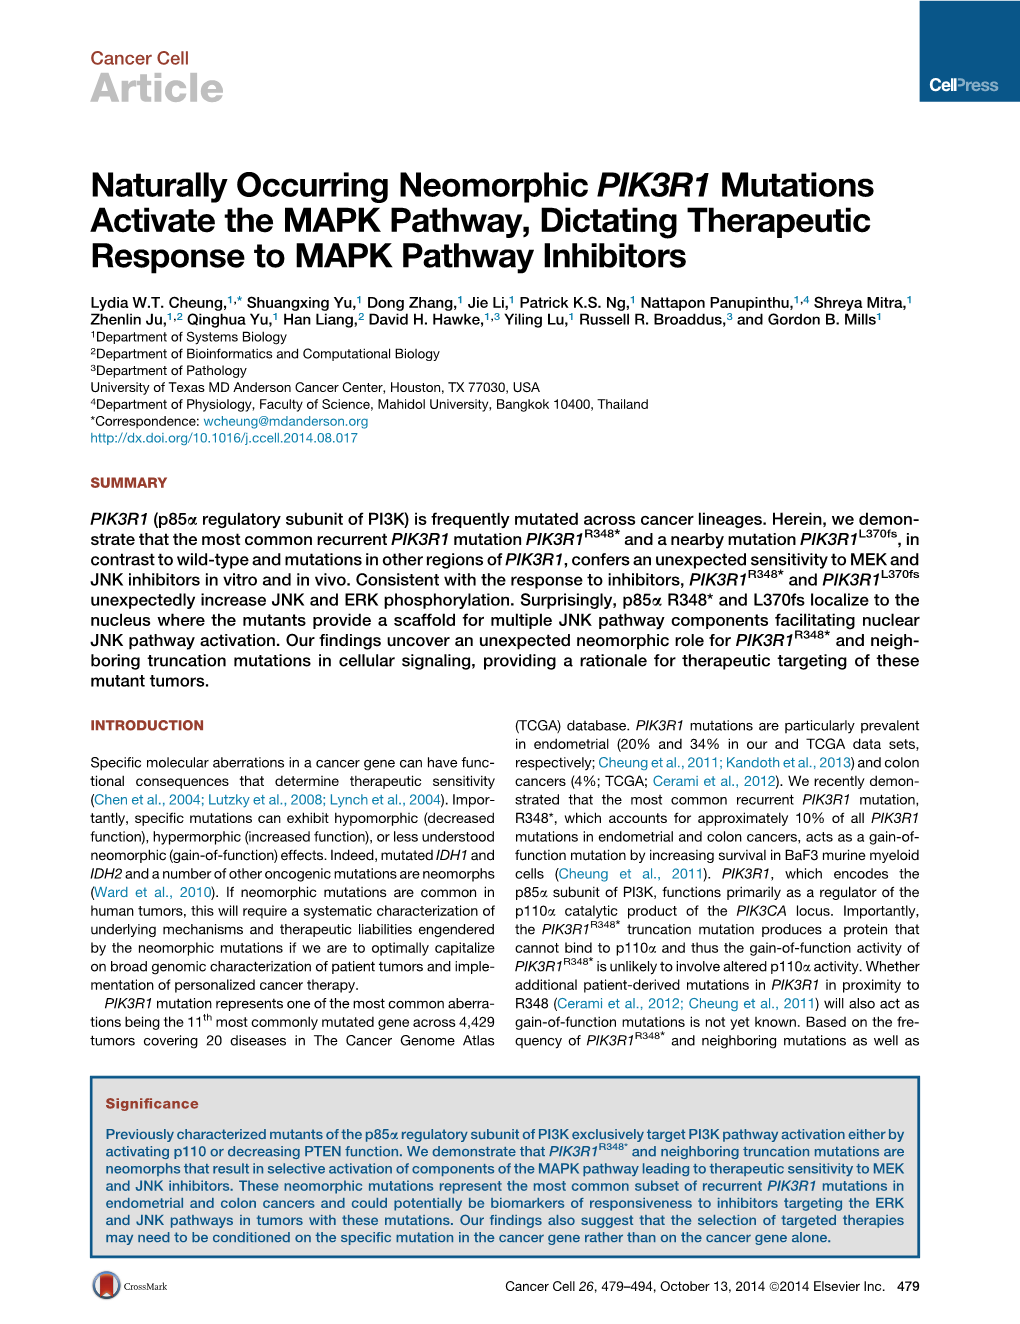 Naturally Occurring Neomorphic PIK3R1 Mutations Activate the MAPK Pathway, Dictating Therapeutic Response to MAPK Pathway Inhibitors